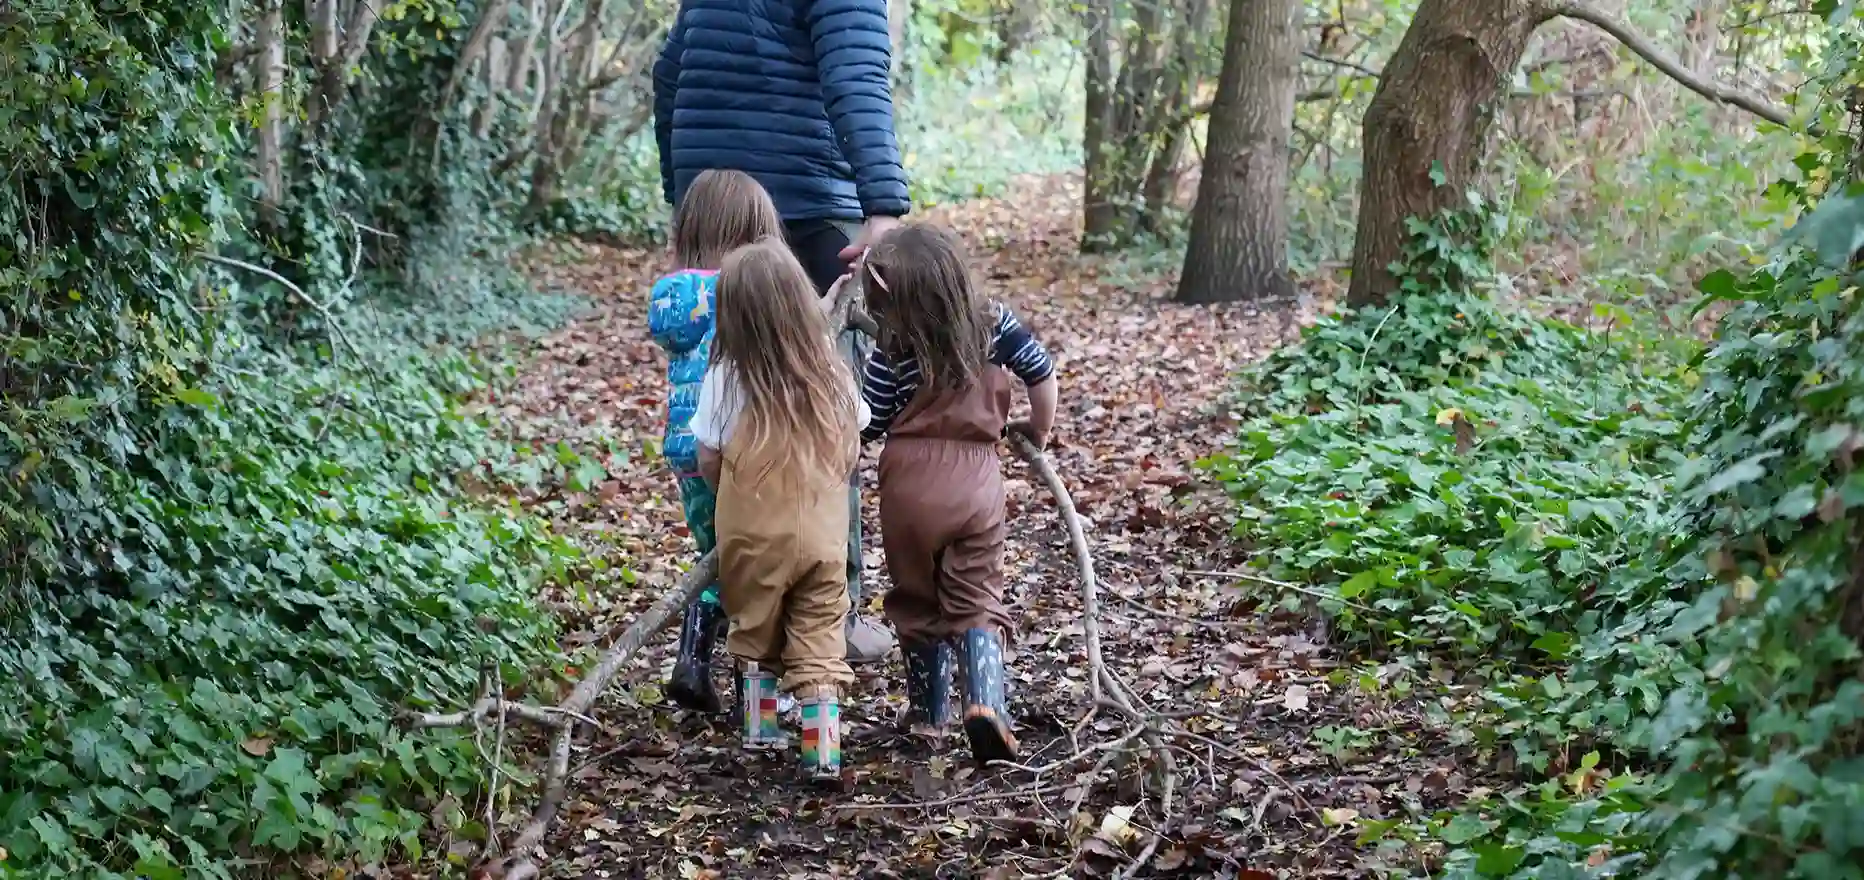 A group of girls carrying branches through a forest to build a den.